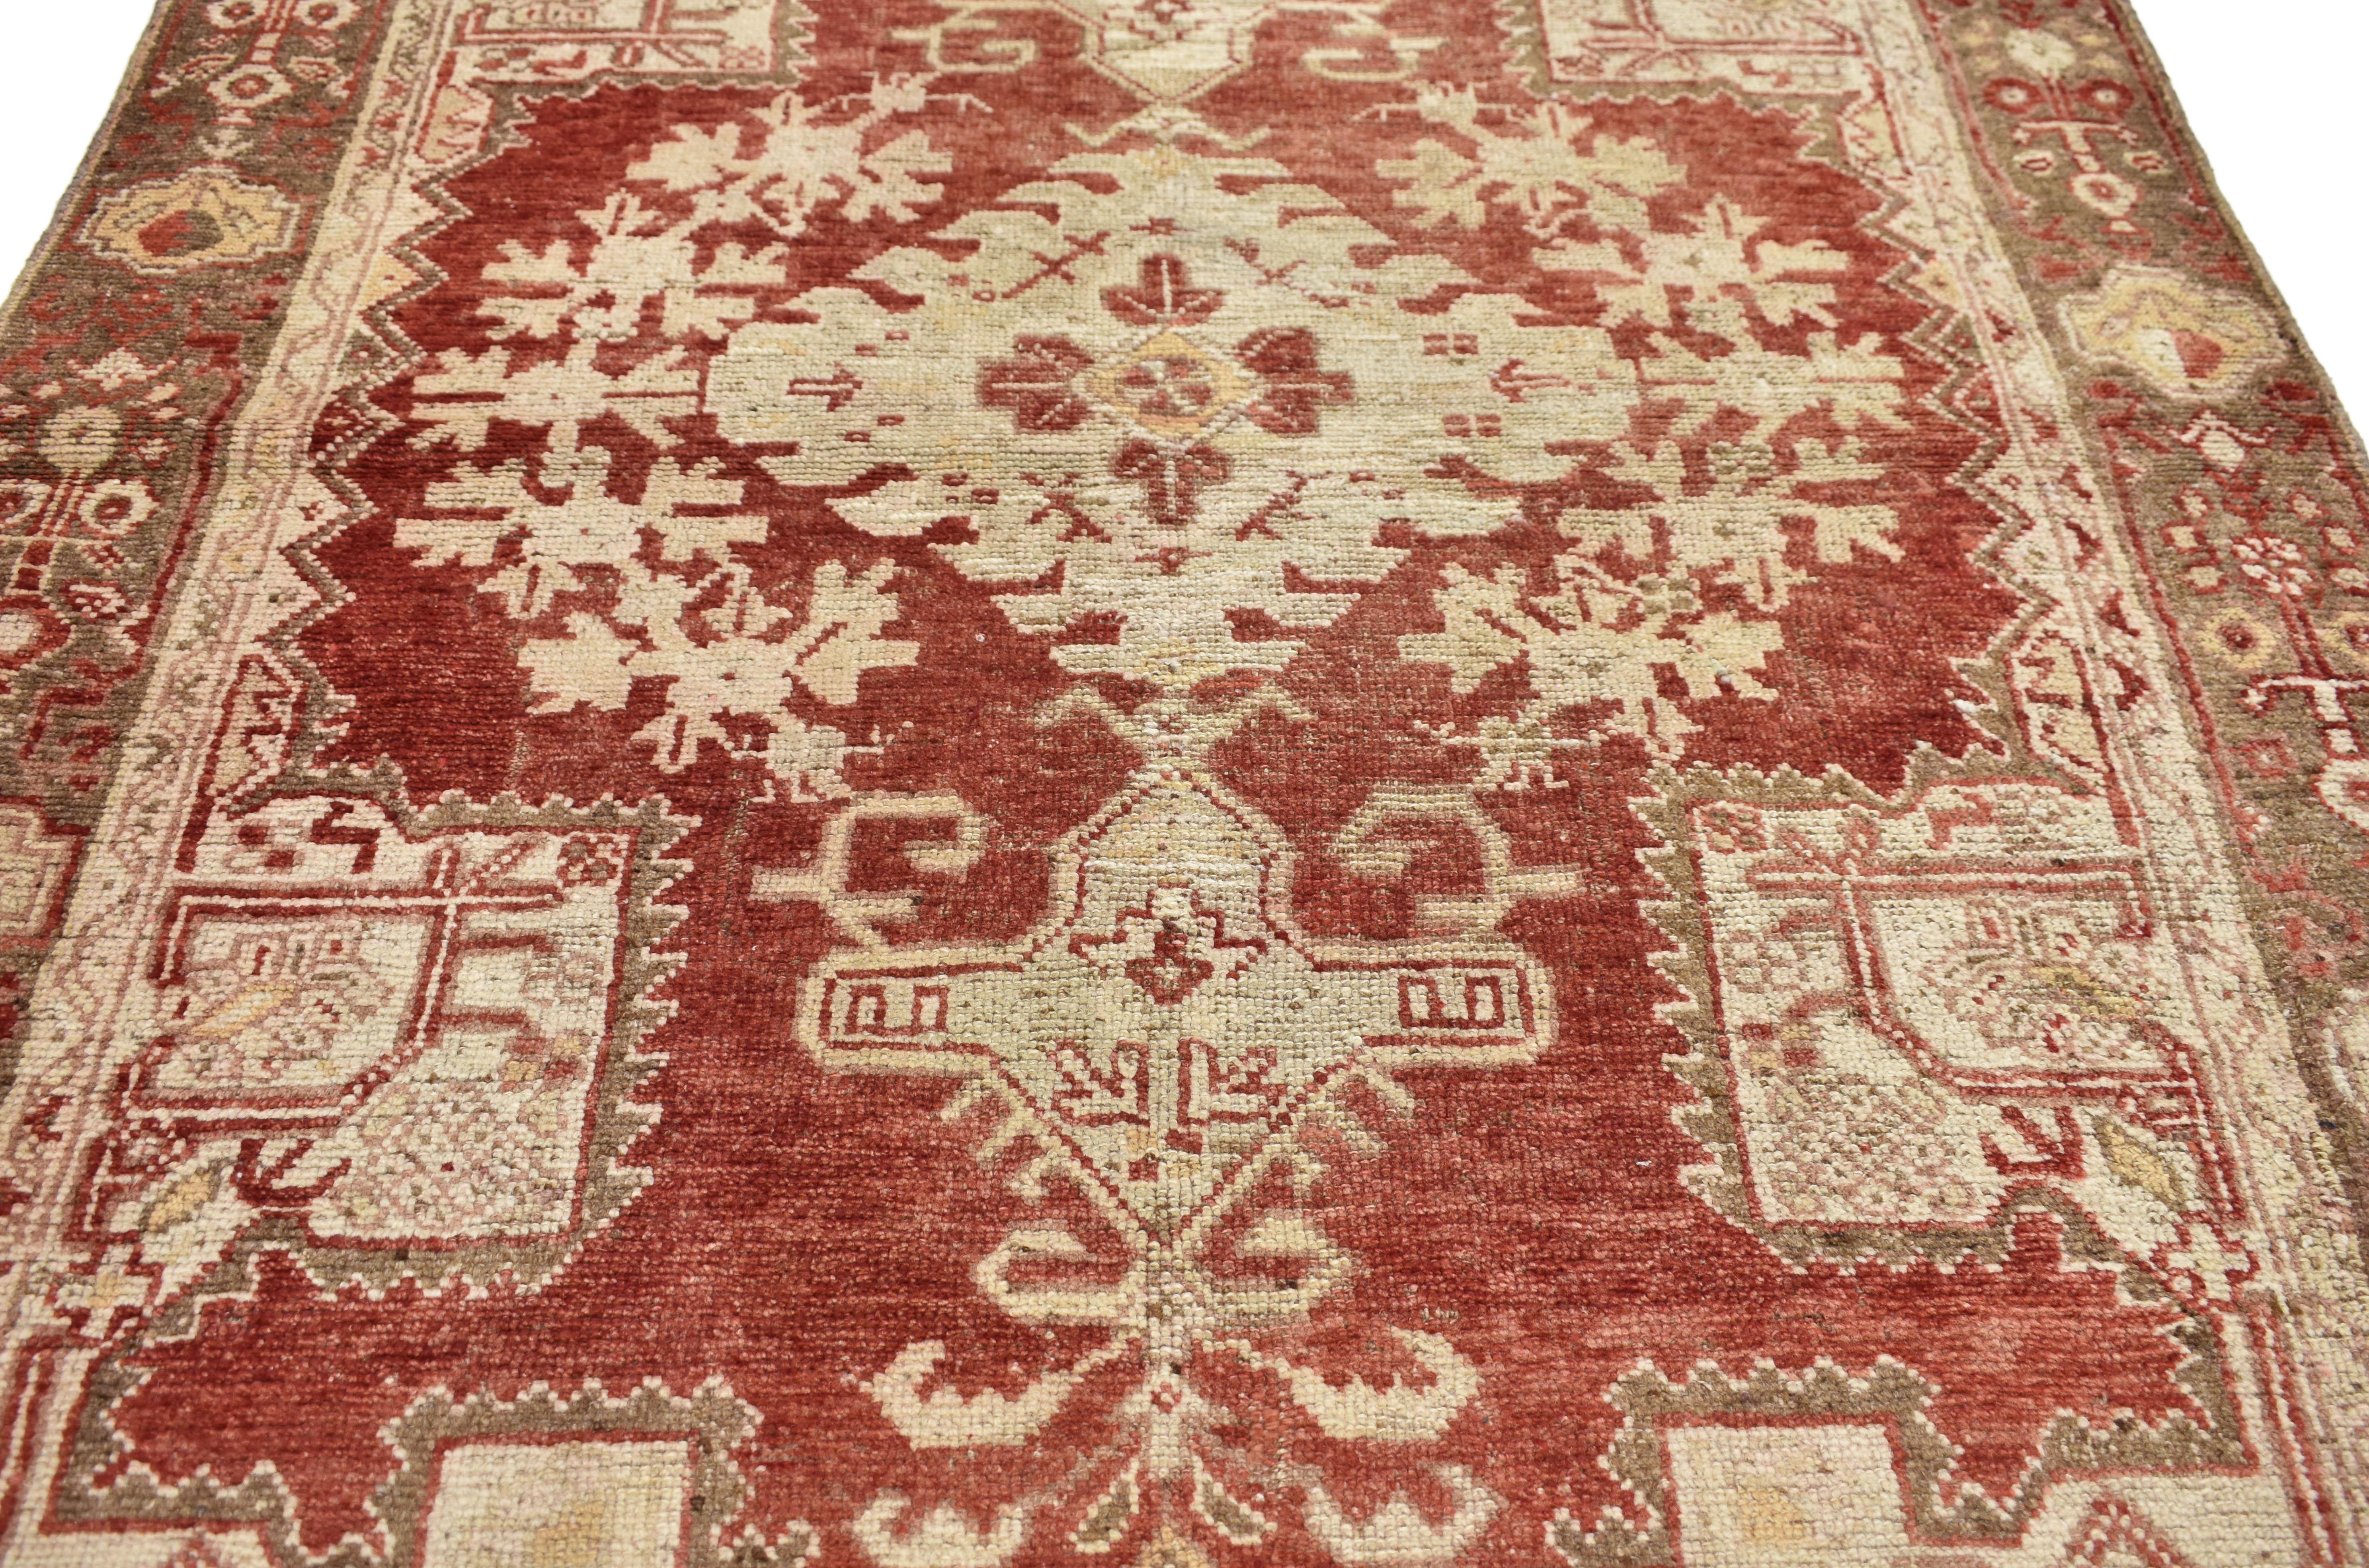 50412, Rustic style vintage Turkish Oushak rug. A perennial beauty, this hand-knotted wool vintage Turkish Oushak rug displays a grand hooked diamond medallion surrounded by a cut-out field and elaborate architectural border against a regal brick